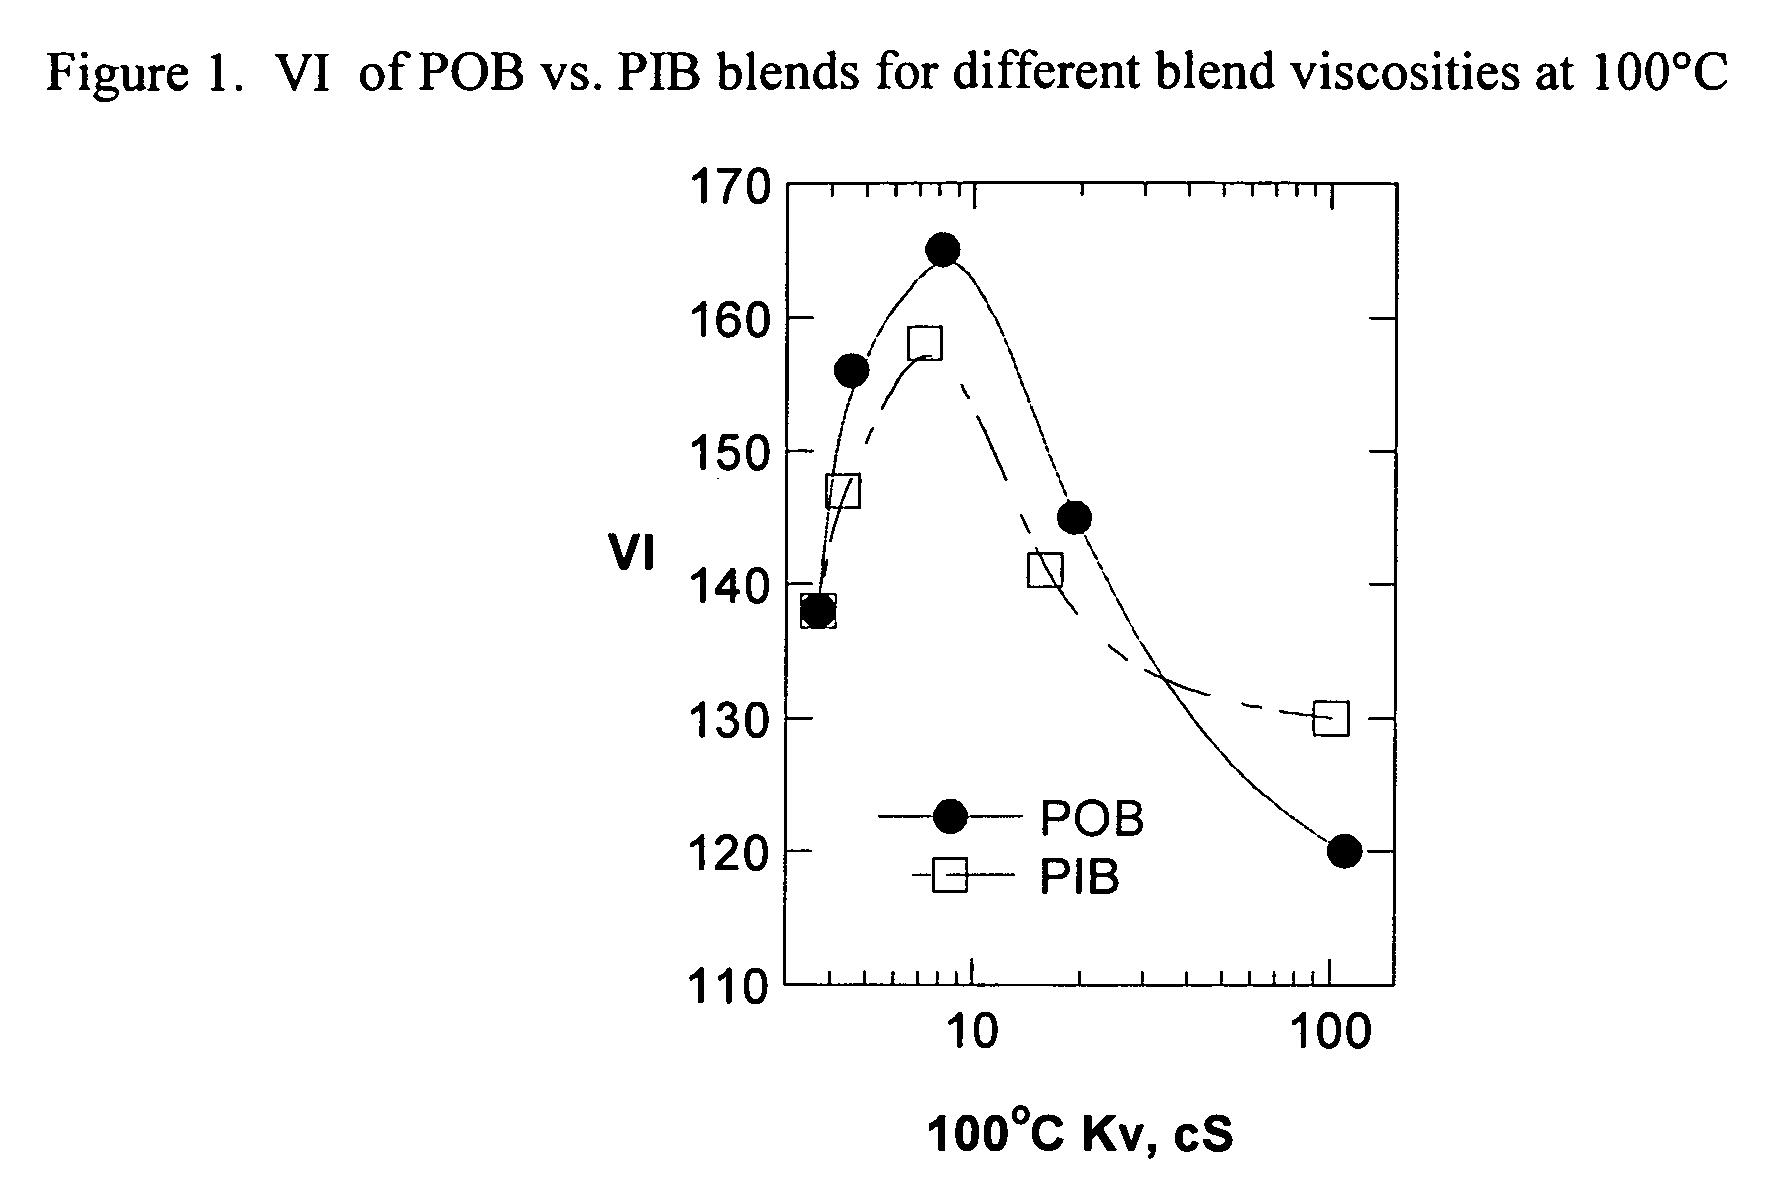 Base stocks and lubricant blends containing poly-alpha olefins